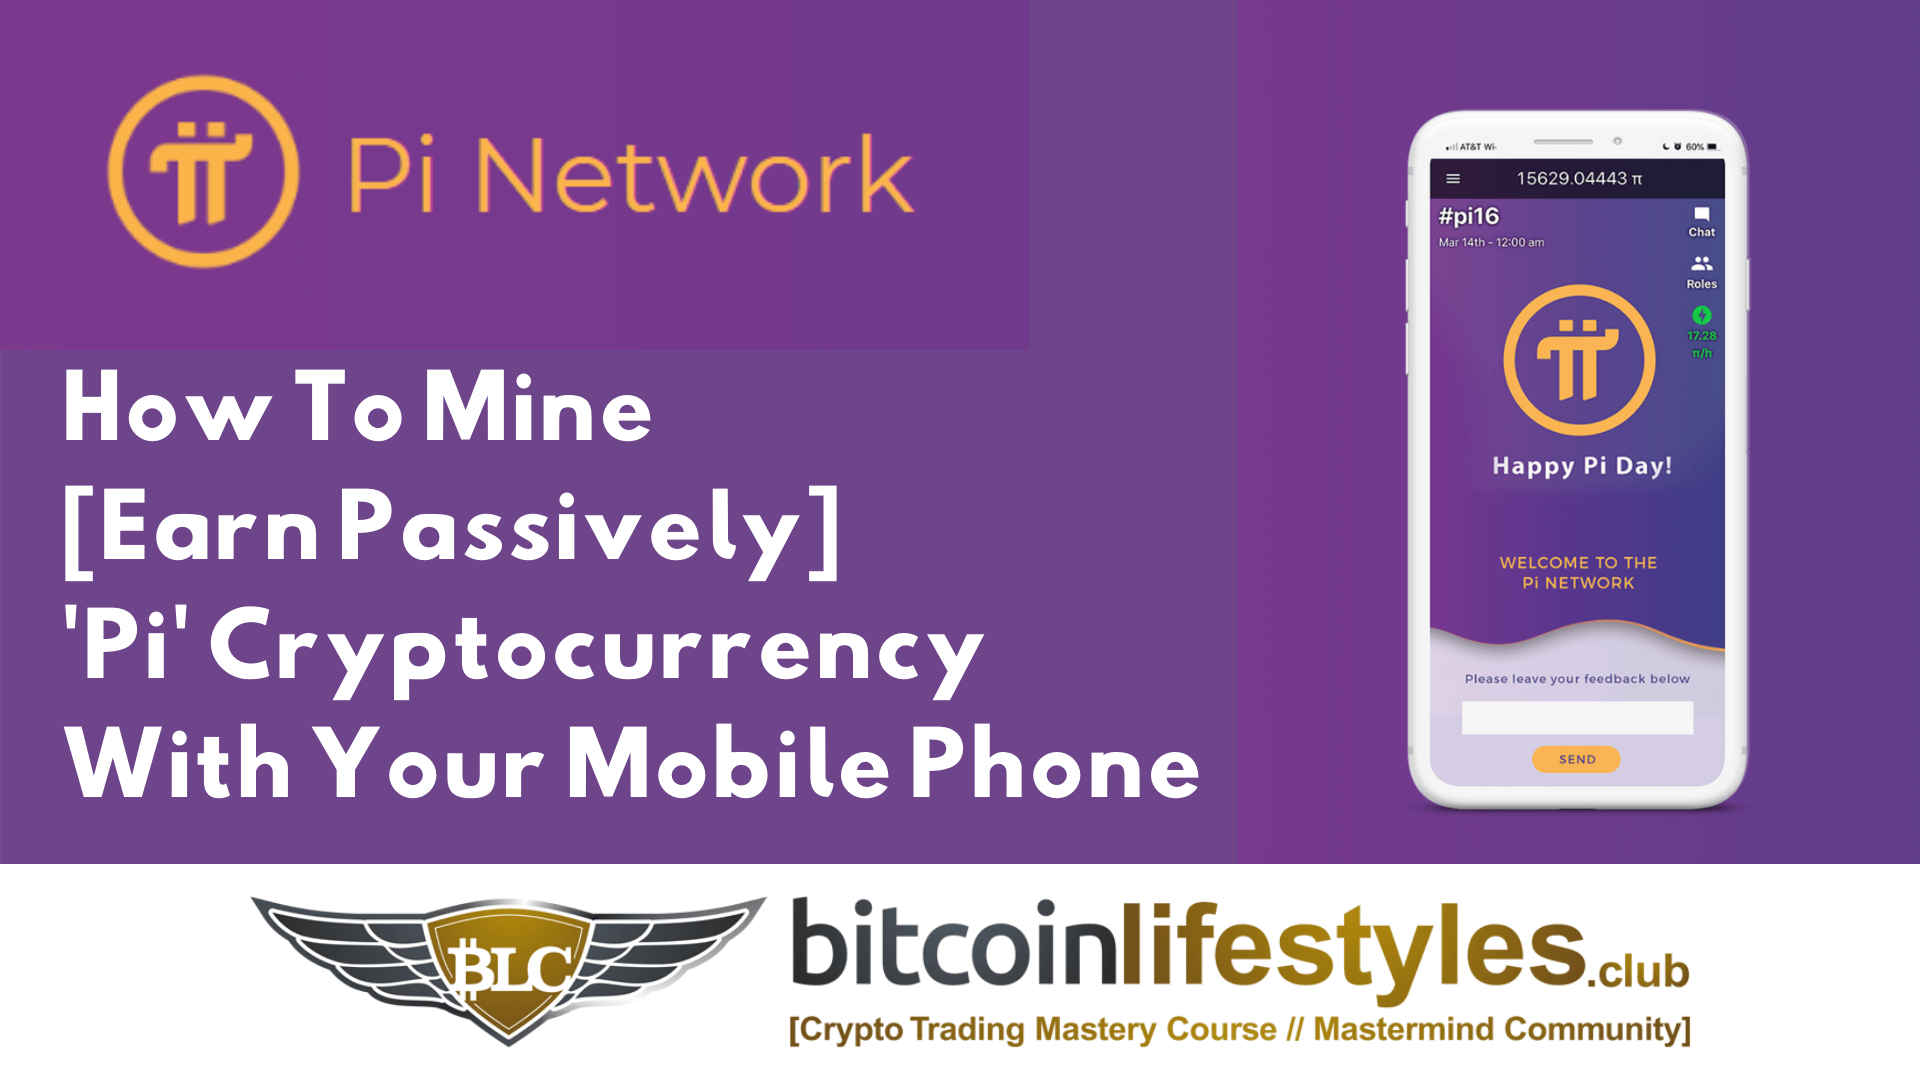 How To Mine Pi Cryptocurrency With Your Mobile Phone